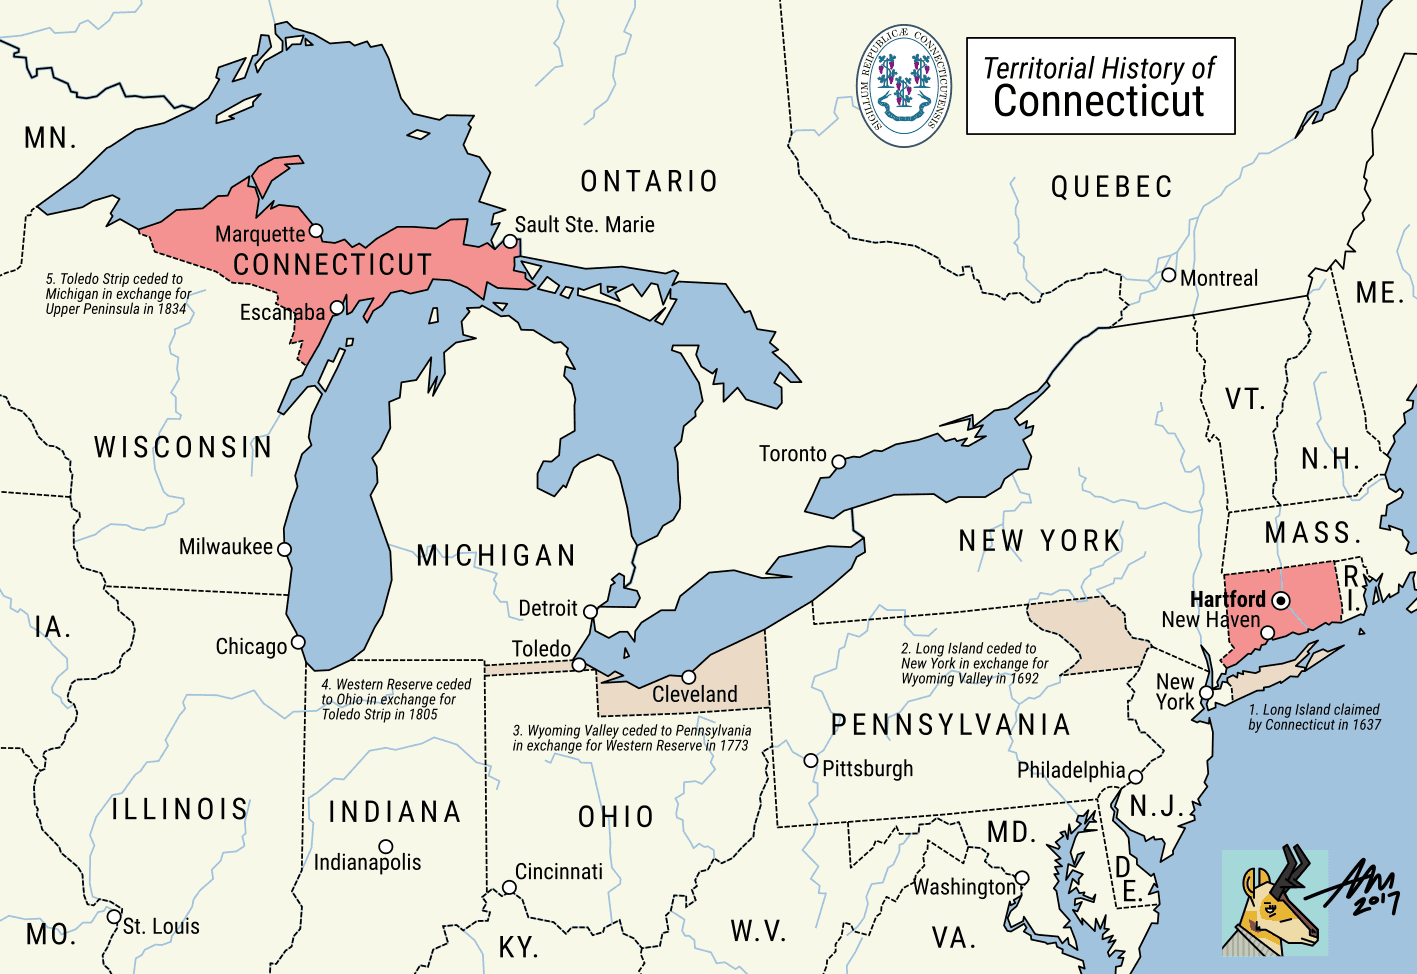 A fictional map of Connecticut's non-existent territorial claims in the Upper Midwest.